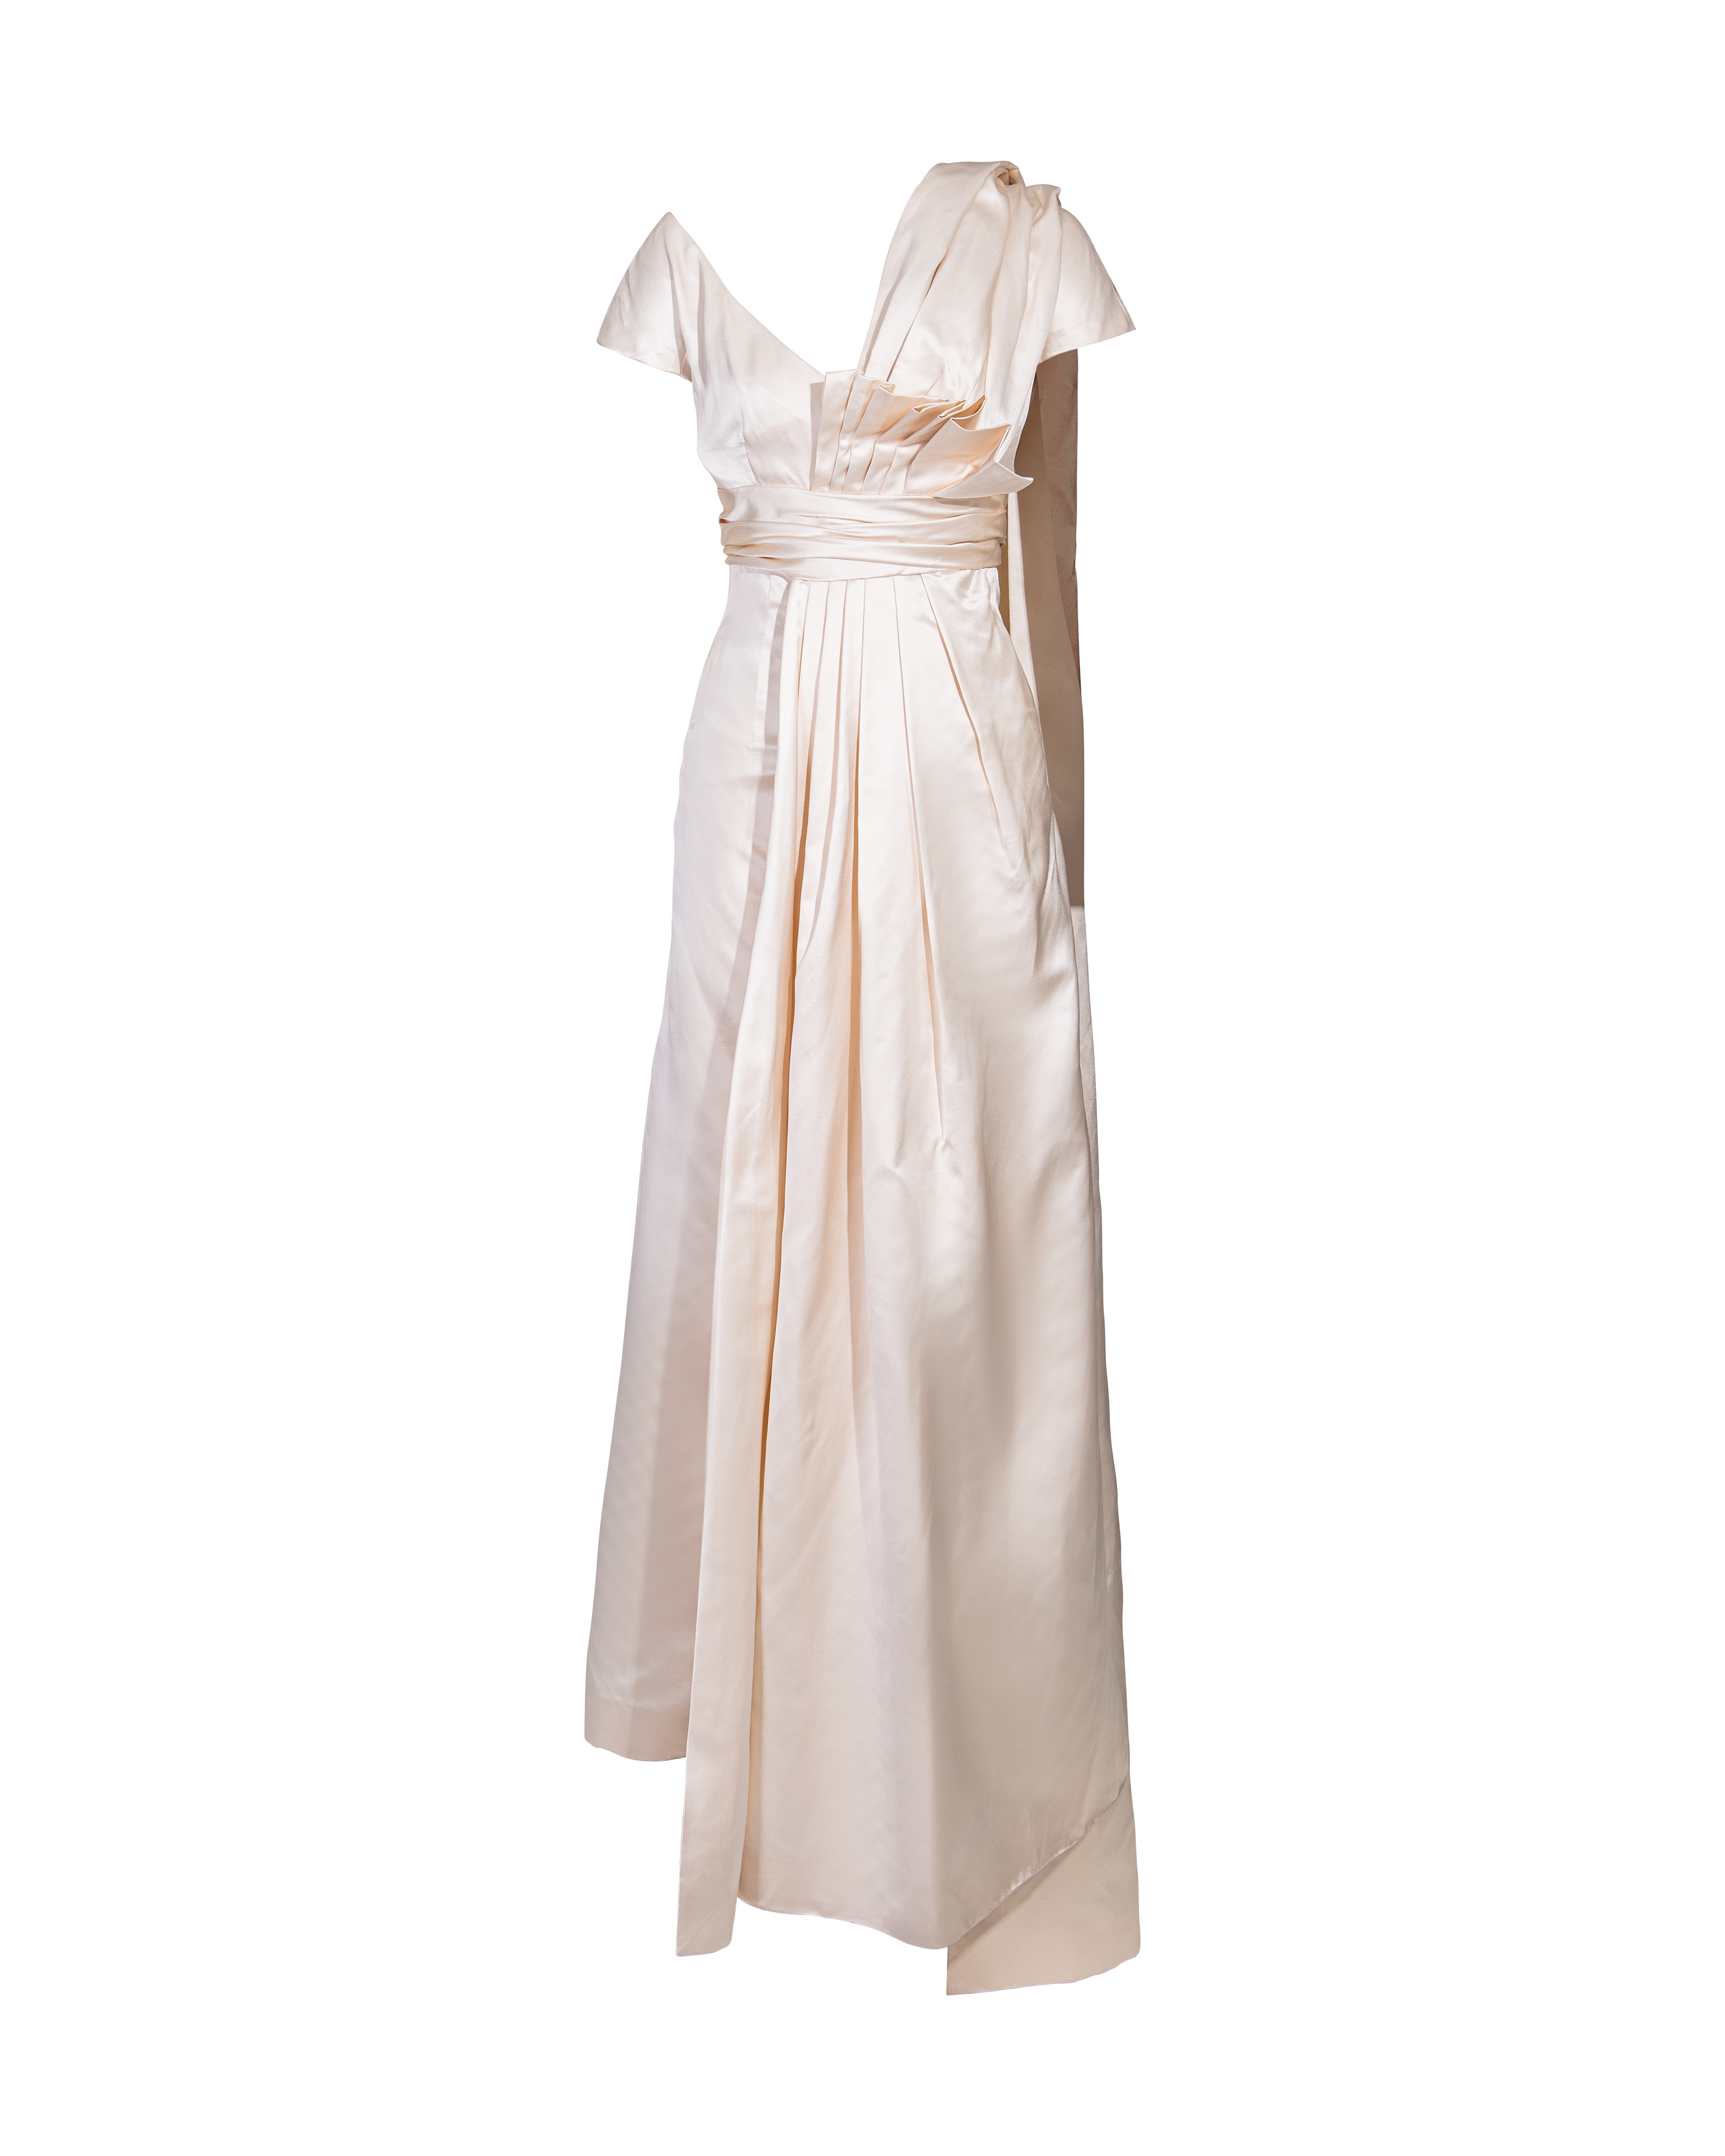 S/S 1955 Short Sleeve Ecru Satin Gown with Sash